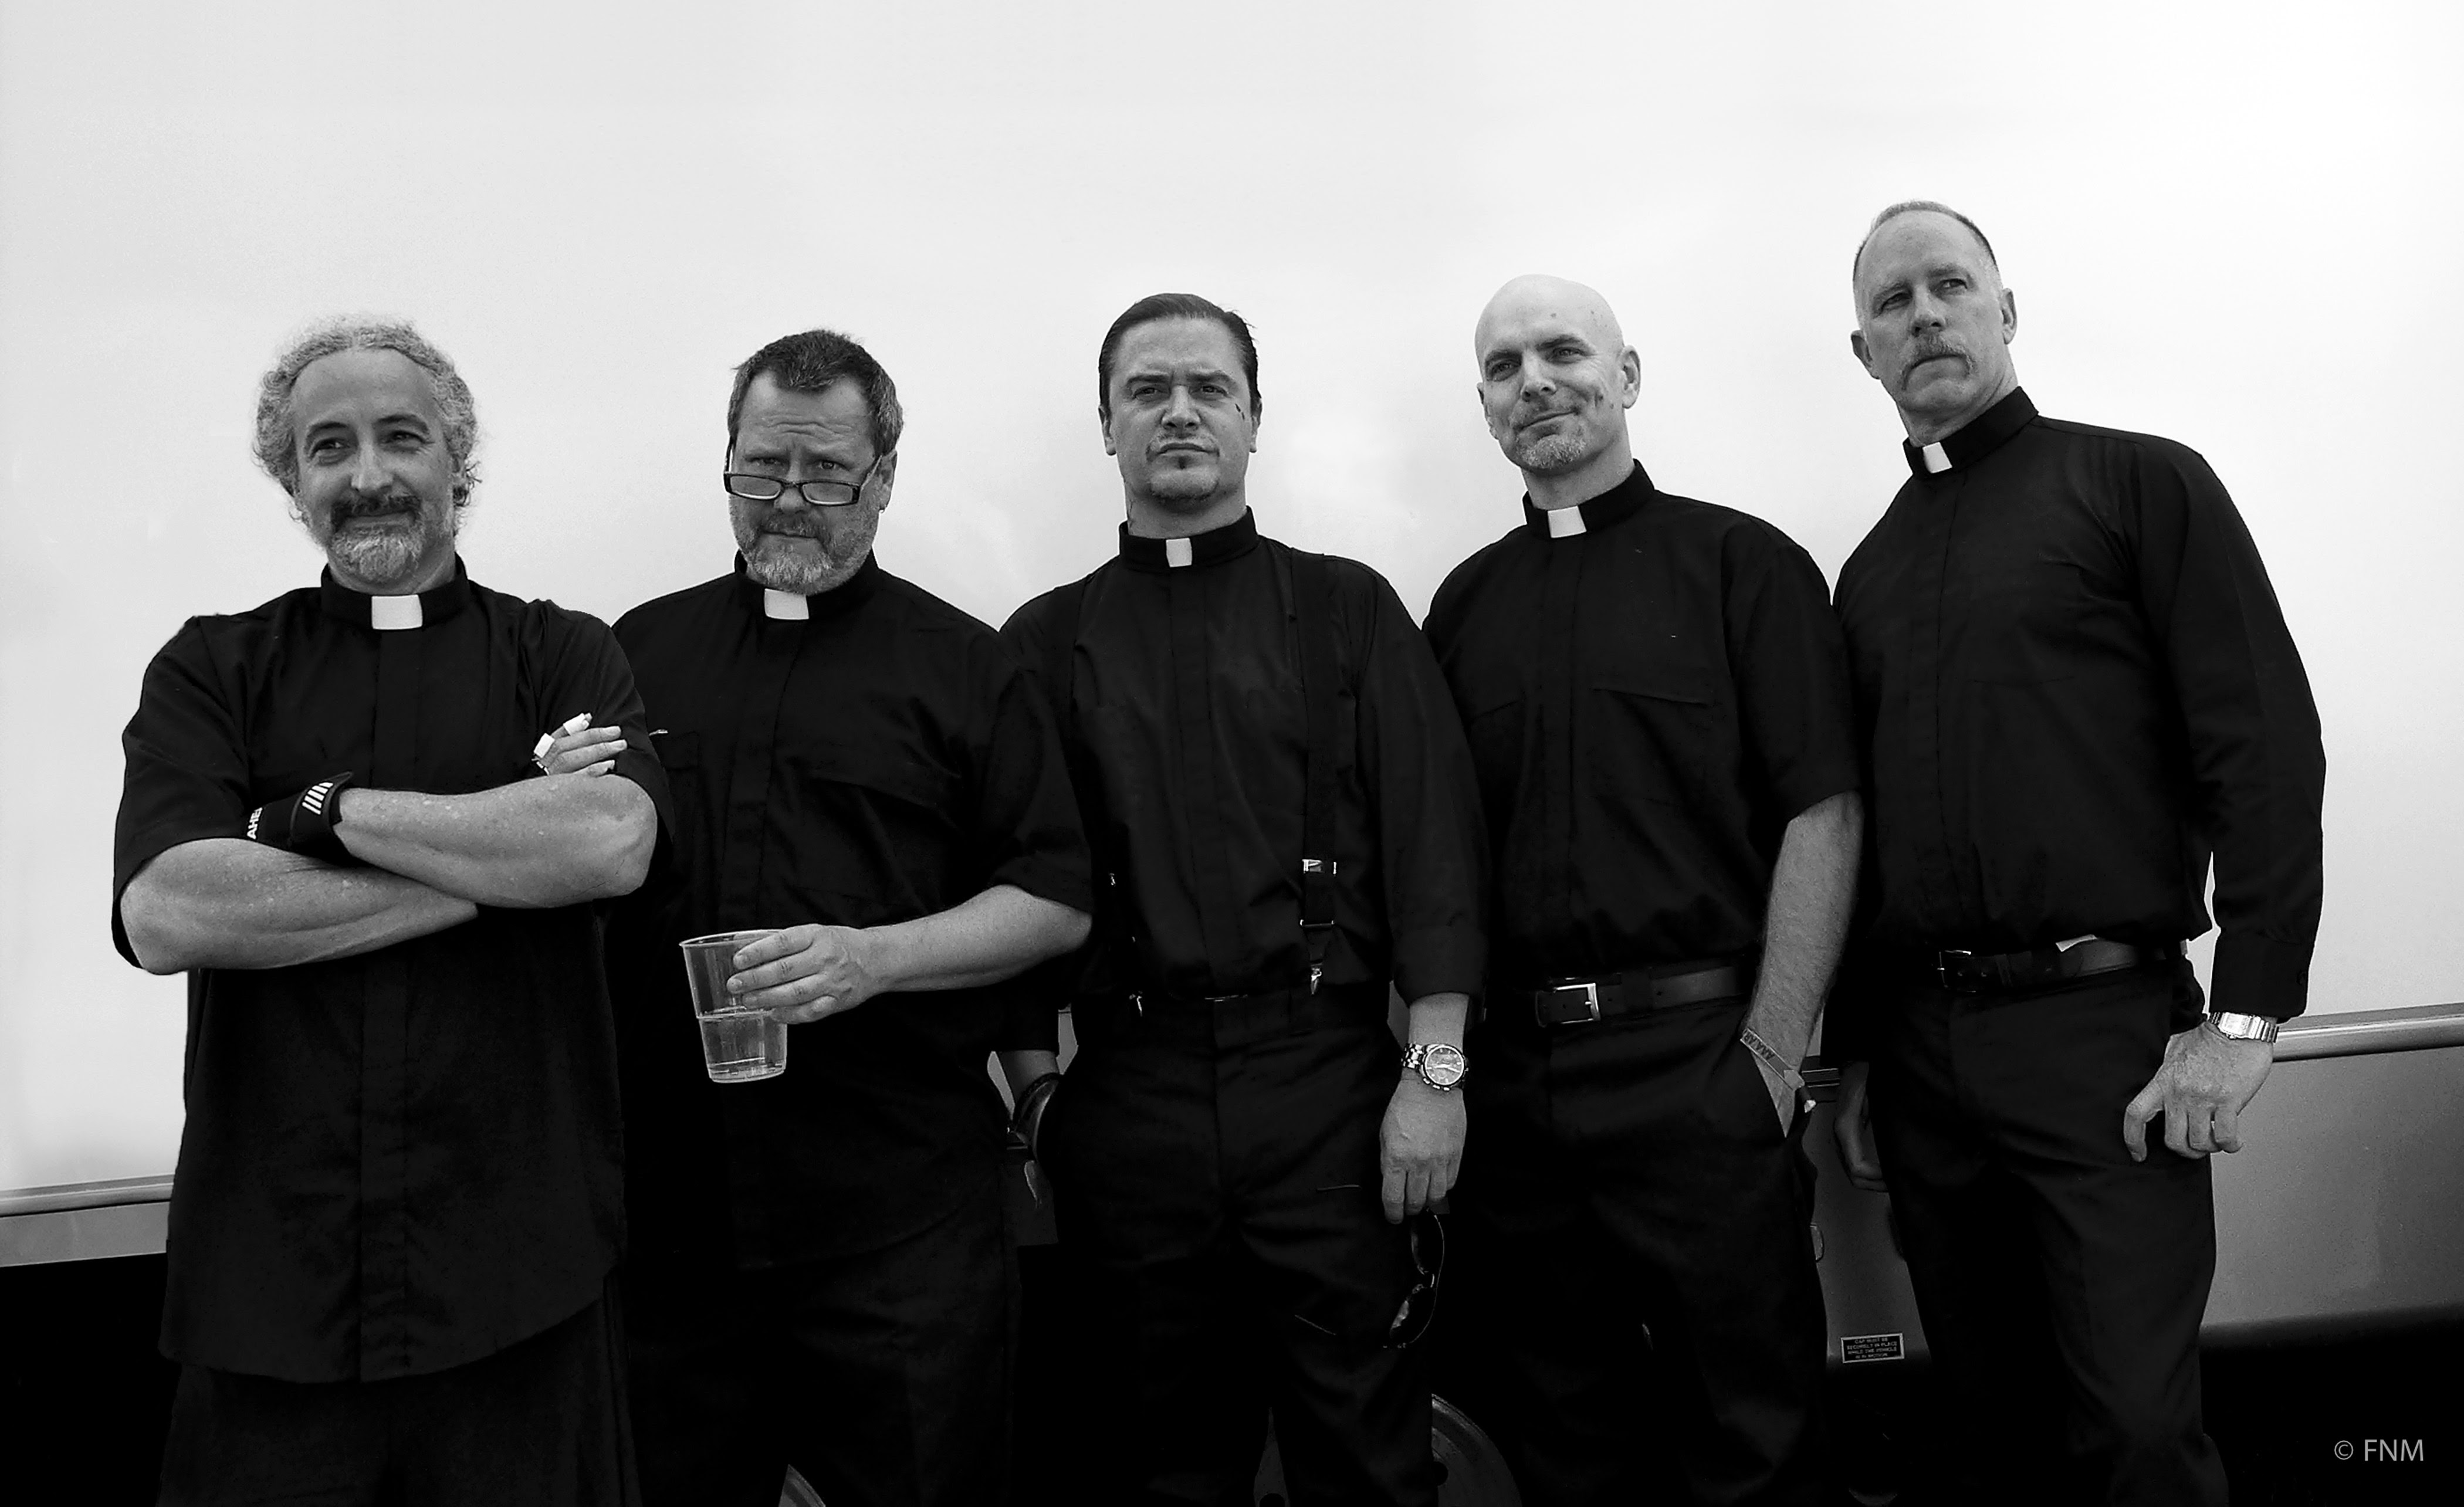 FAITH NO MORE RECORDING NEW ALBUM, LIMITED EDITION 7″ SINGLE DUE OUT NOVEMBER 28